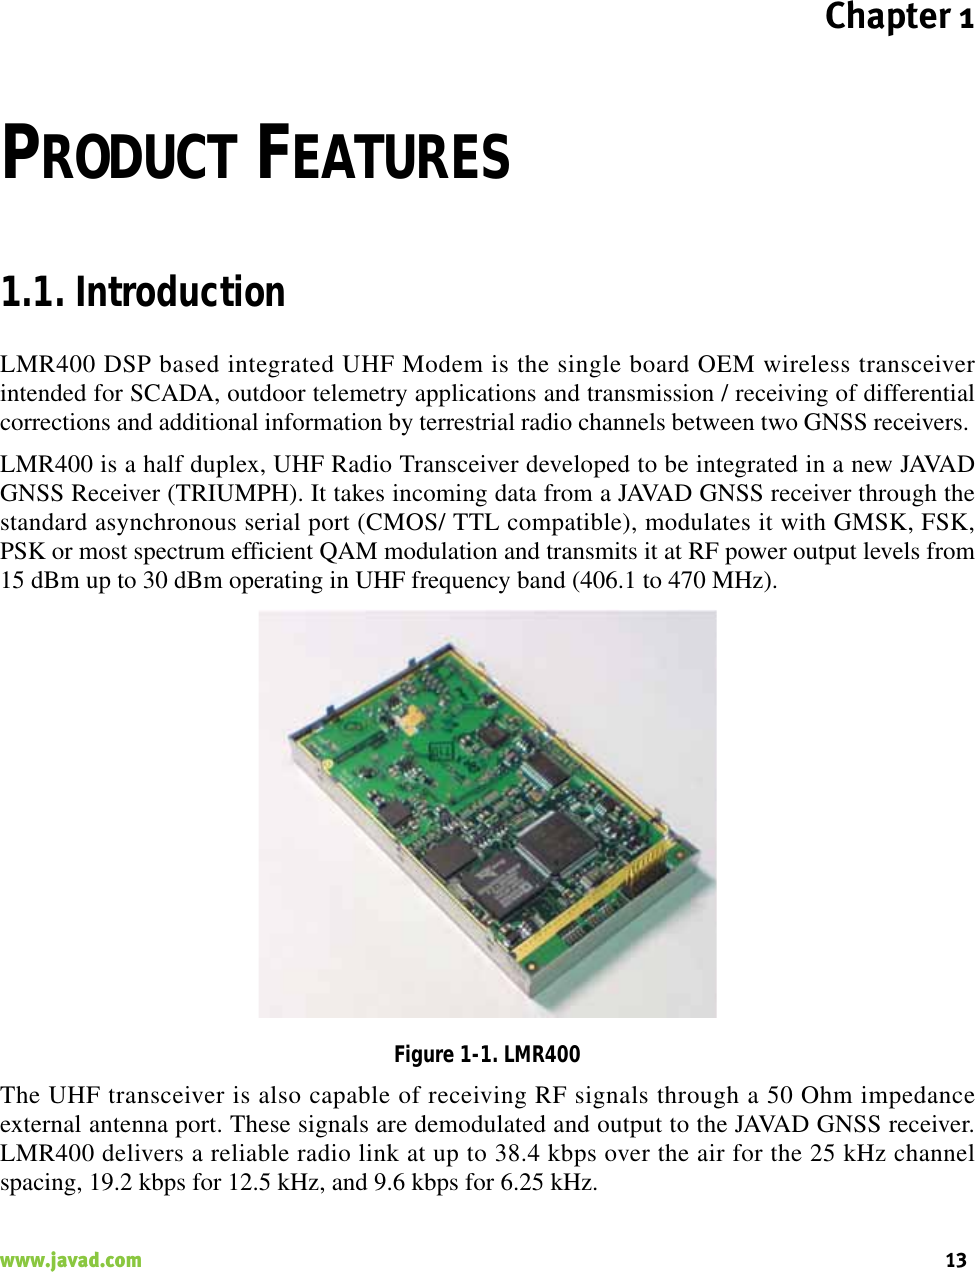 Chapter 113www.javad.com                                                                                                                                                    PRODUCT FEATURES1.1. IntroductionLMR400 DSP based integrated UHF Modem is the single board OEM wireless transceiverintended for SCADA, outdoor telemetry applications and transmission / receiving of differentialcorrections and additional information by terrestrial radio channels between two GNSS receivers. LMR400 is a half duplex, UHF Radio Transceiver developed to be integrated in a new JAVADGNSS Receiver (TRIUMPH). It takes incoming data from a JAVAD GNSS receiver through thestandard asynchronous serial port (CMOS/ TTL compatible), modulates it with GMSK, FSK,PSK or most spectrum efficient QAM modulation and transmits it at RF power output levels from15 dBm up to 30 dBm operating in UHF frequency band (406.1 to 470 MHz).Figure 1-1. LMR400The UHF transceiver is also capable of receiving RF signals through a 50 Ohm impedanceexternal antenna port. These signals are demodulated and output to the JAVAD GNSS receiver.LMR400 delivers a reliable radio link at up to 38.4 kbps over the air for the 25 kHz channelspacing, 19.2 kbps for 12.5 kHz, and 9.6 kbps for 6.25 kHz.